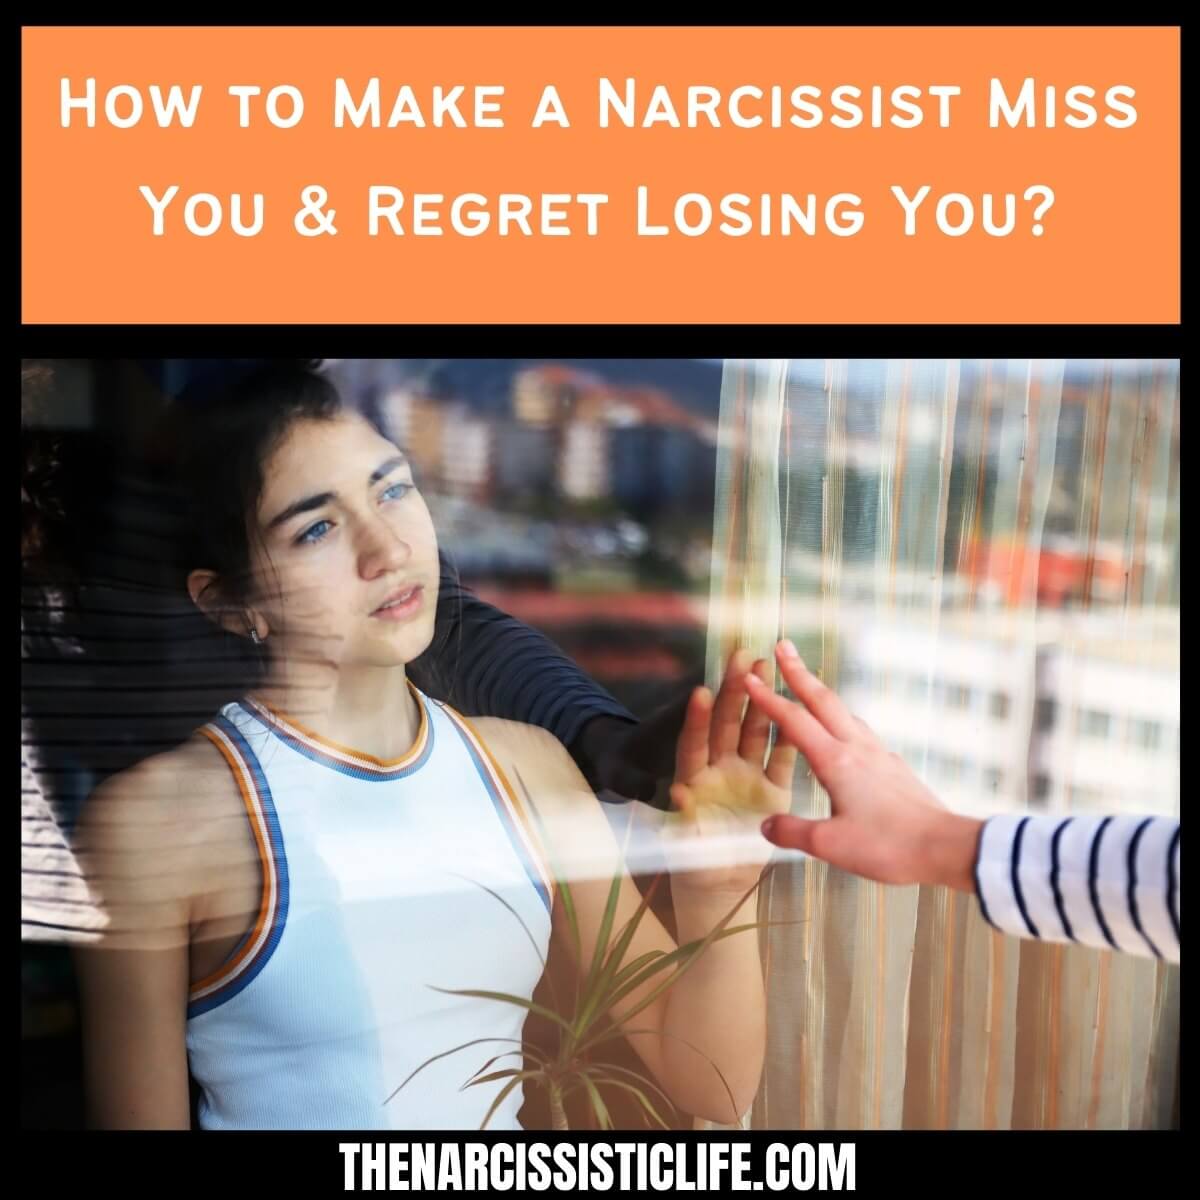 How to Make a Narcissist Miss You & Regret Losing You?